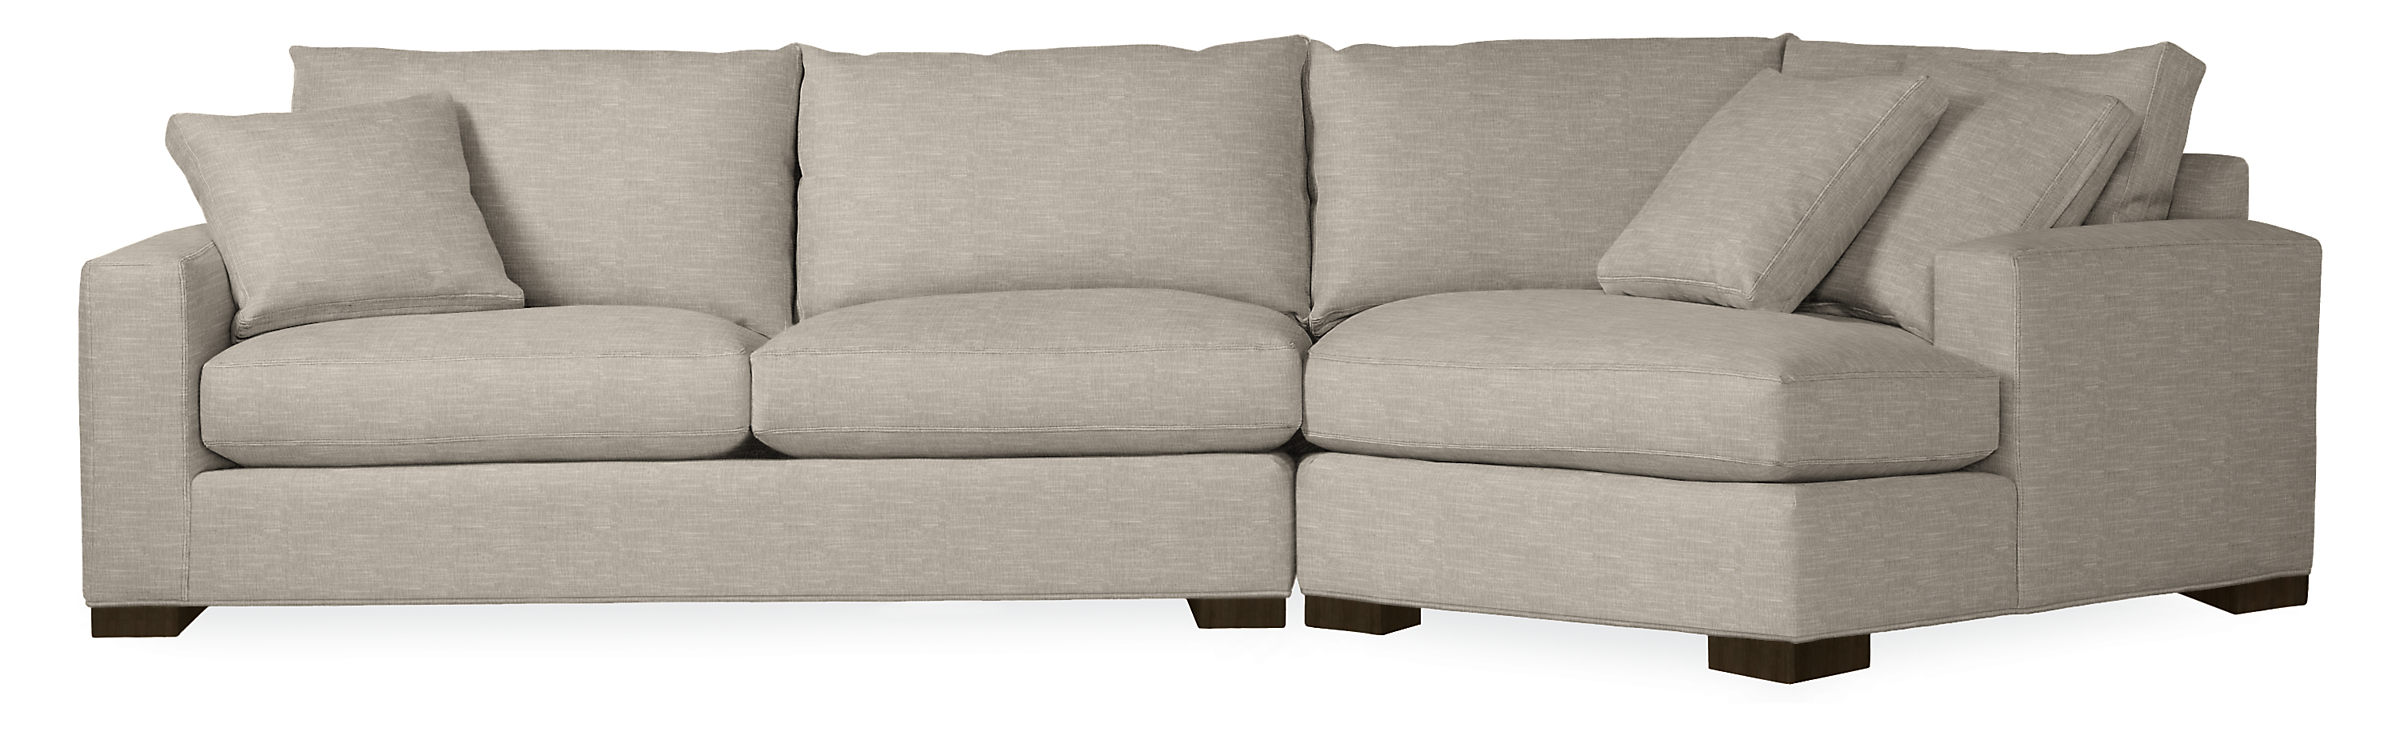 Metro 137" Sofa with Right-Arm Angled Chaise